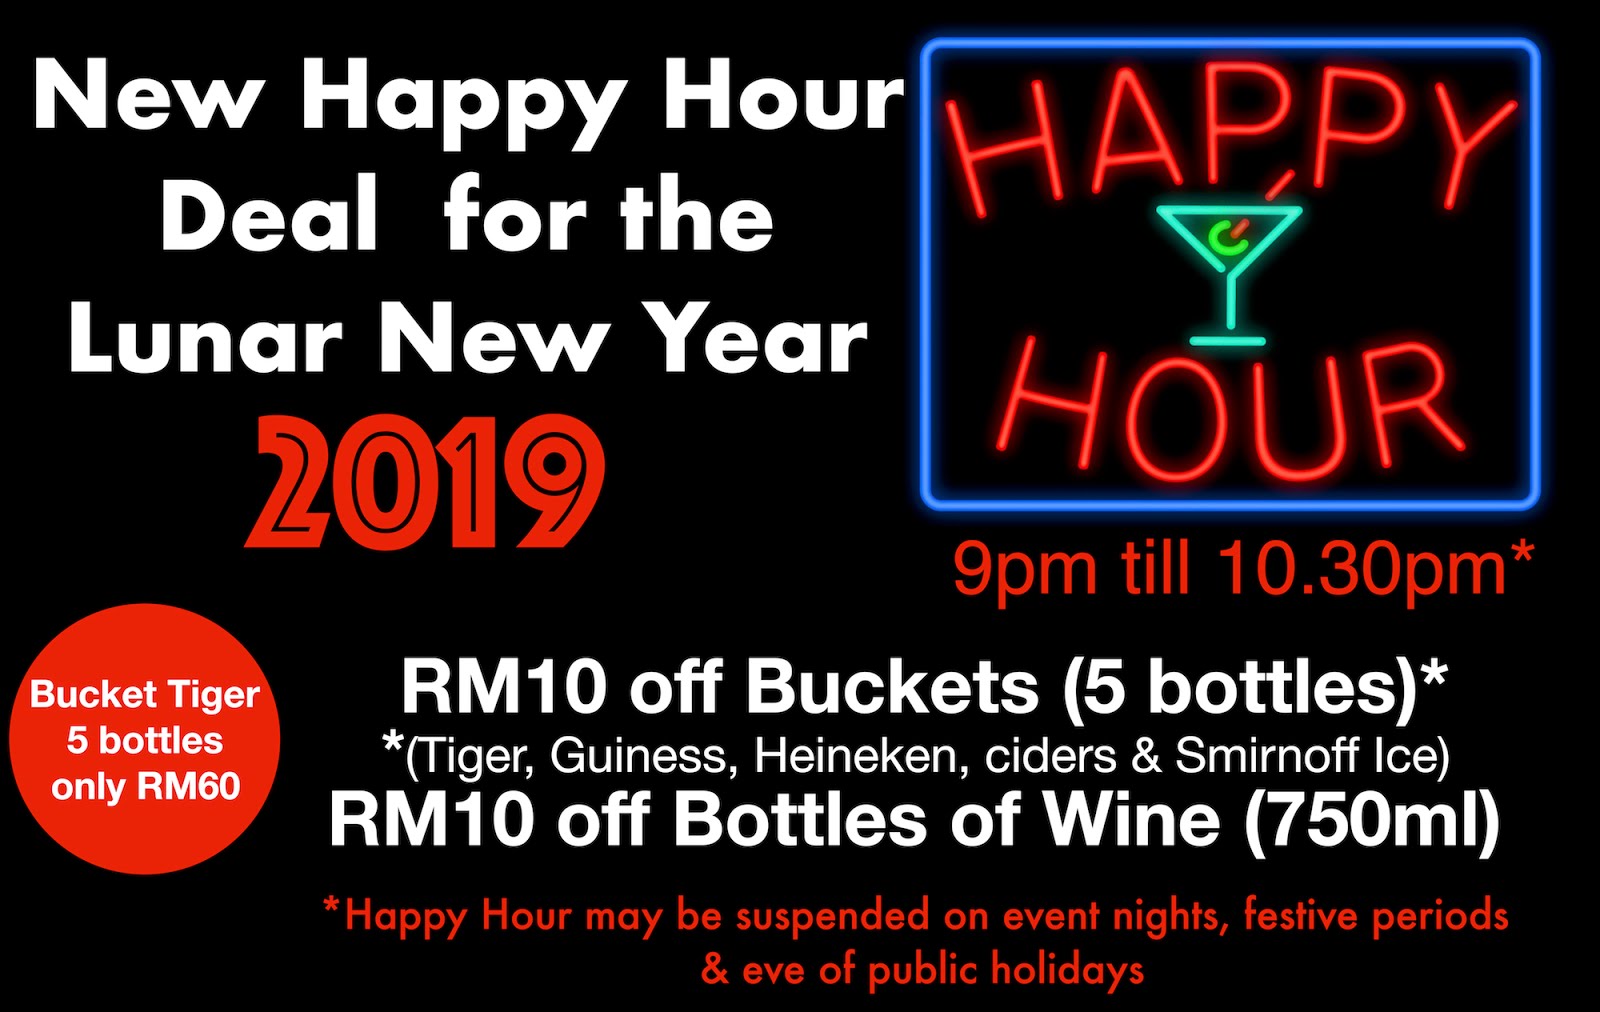 New Lunar Year - New Happy Hour Deal